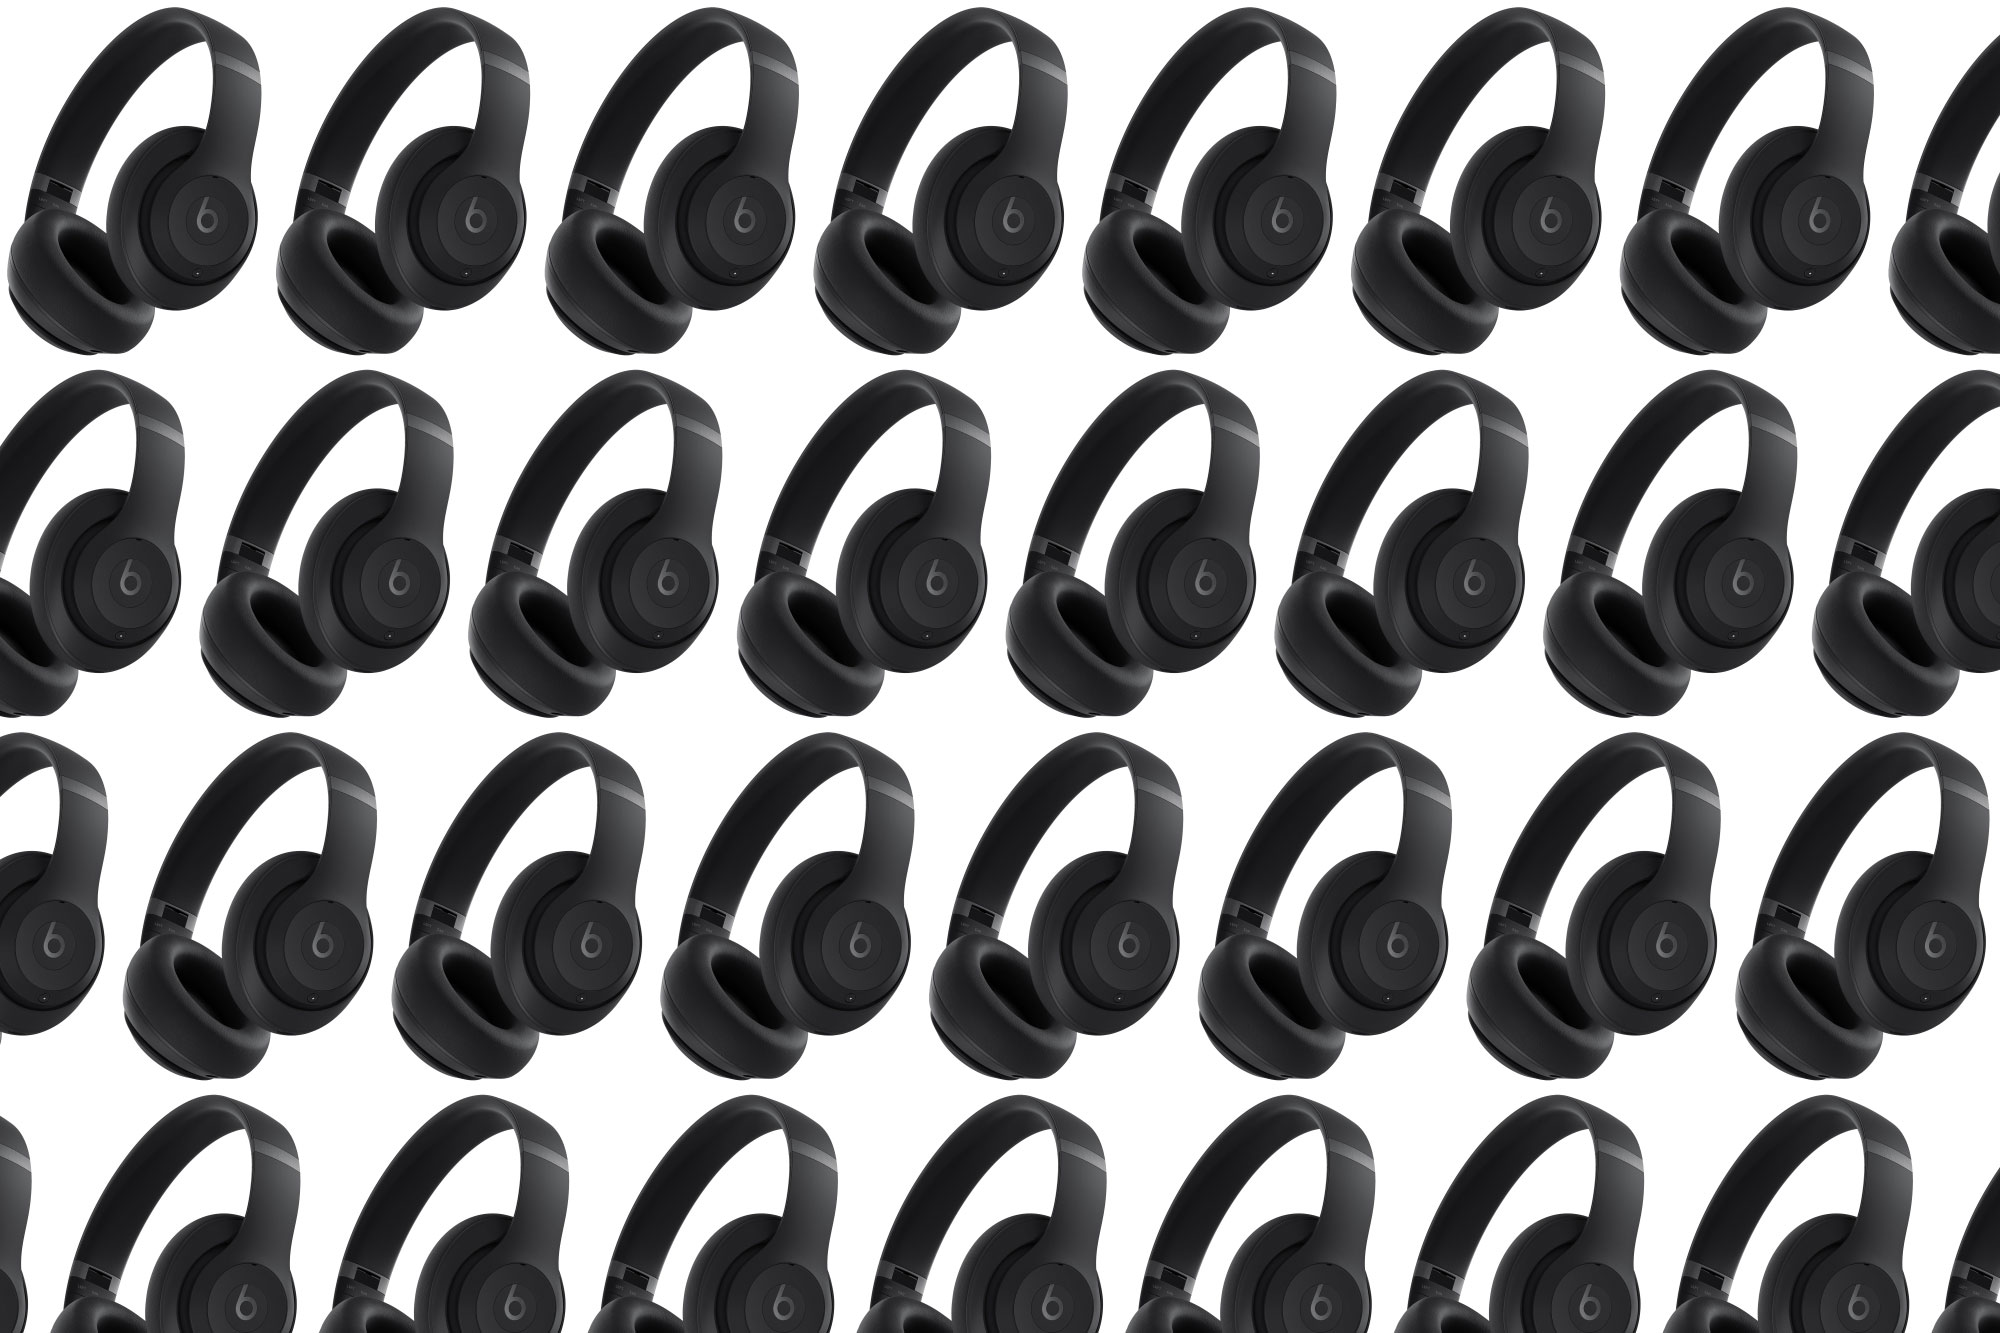 A black pair of Beats studio pro headphones in a pattern on a plain background